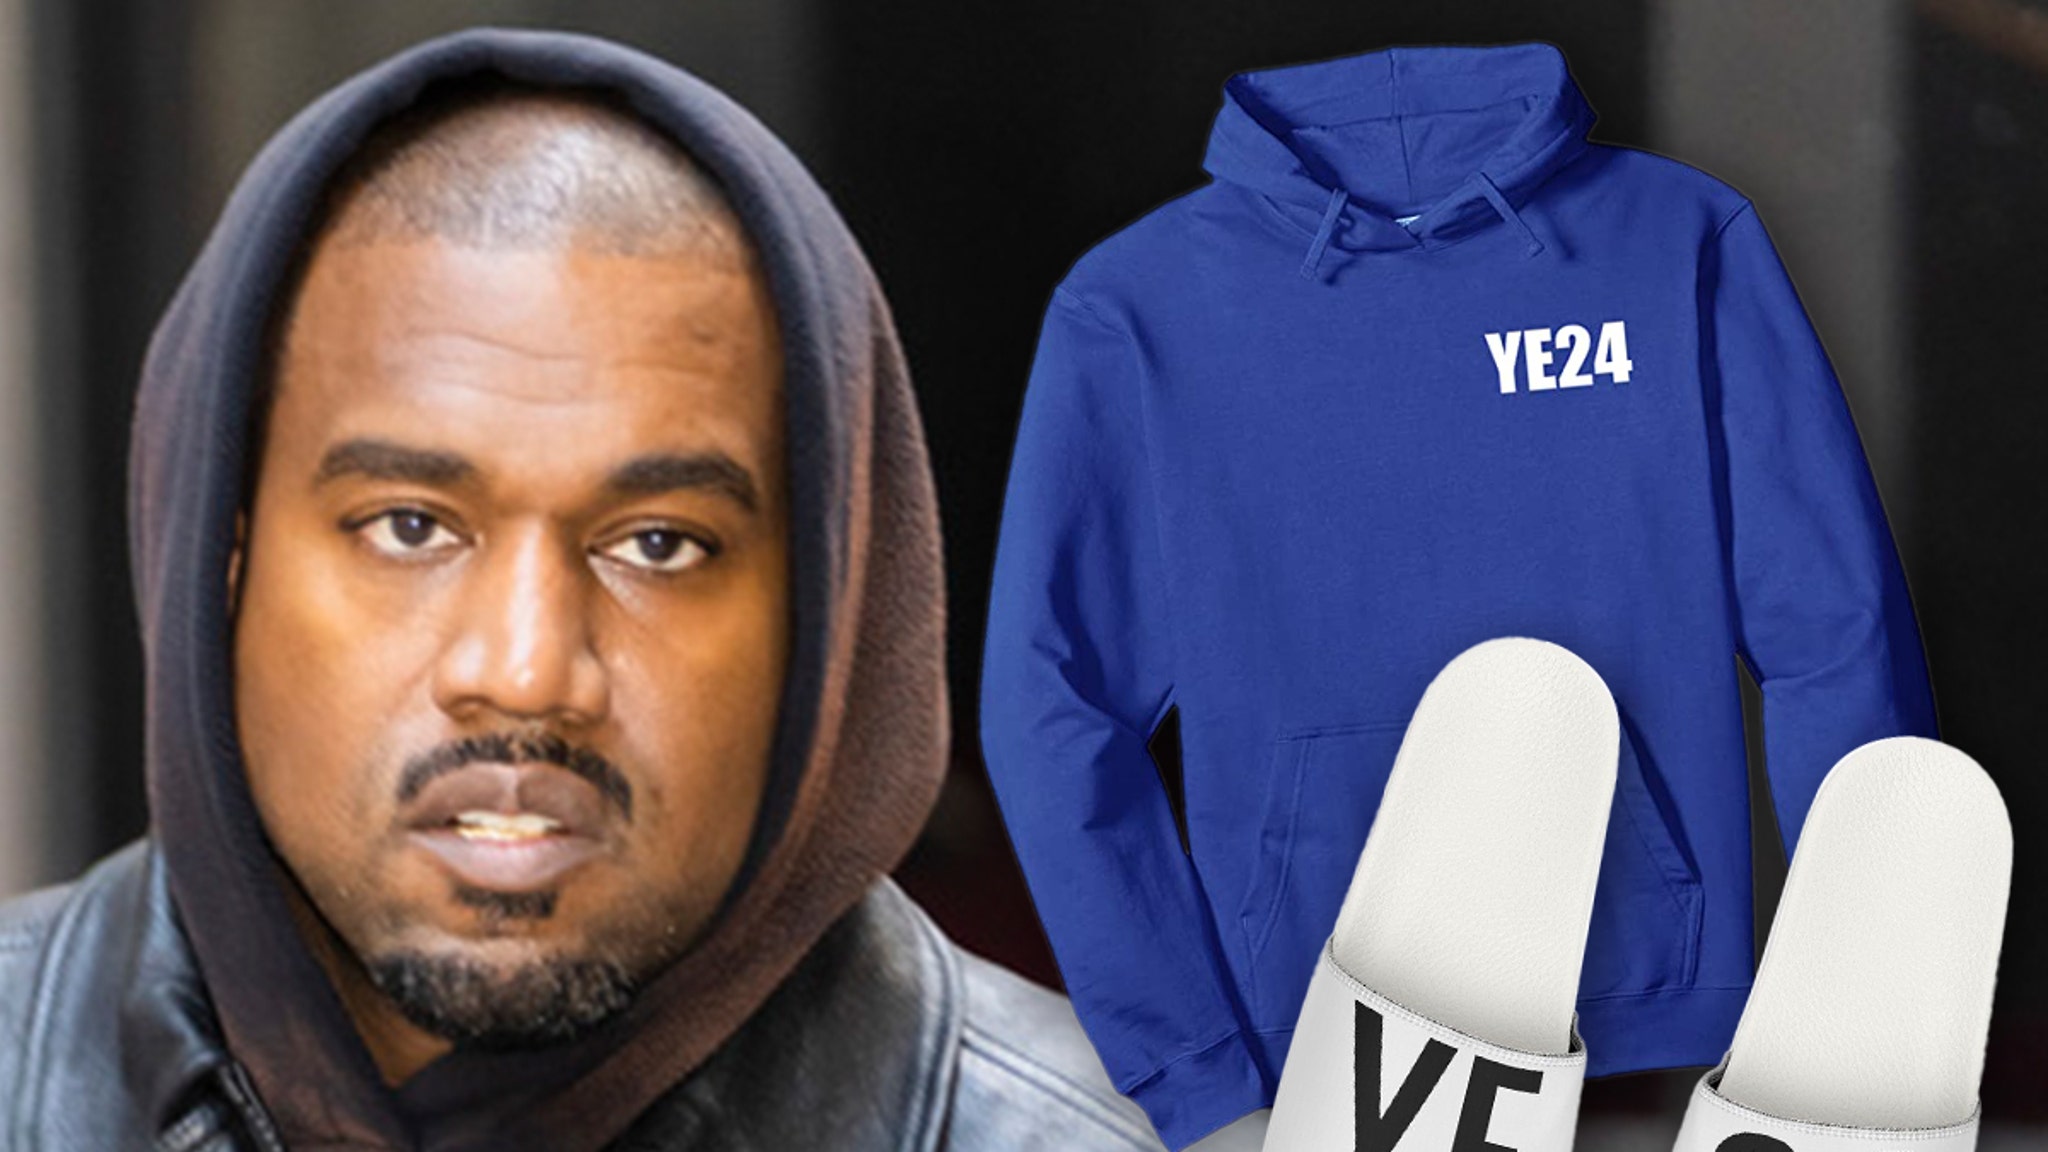 Ye24 Merch for Kanye West’s Potential Presidential Run Floods Sites